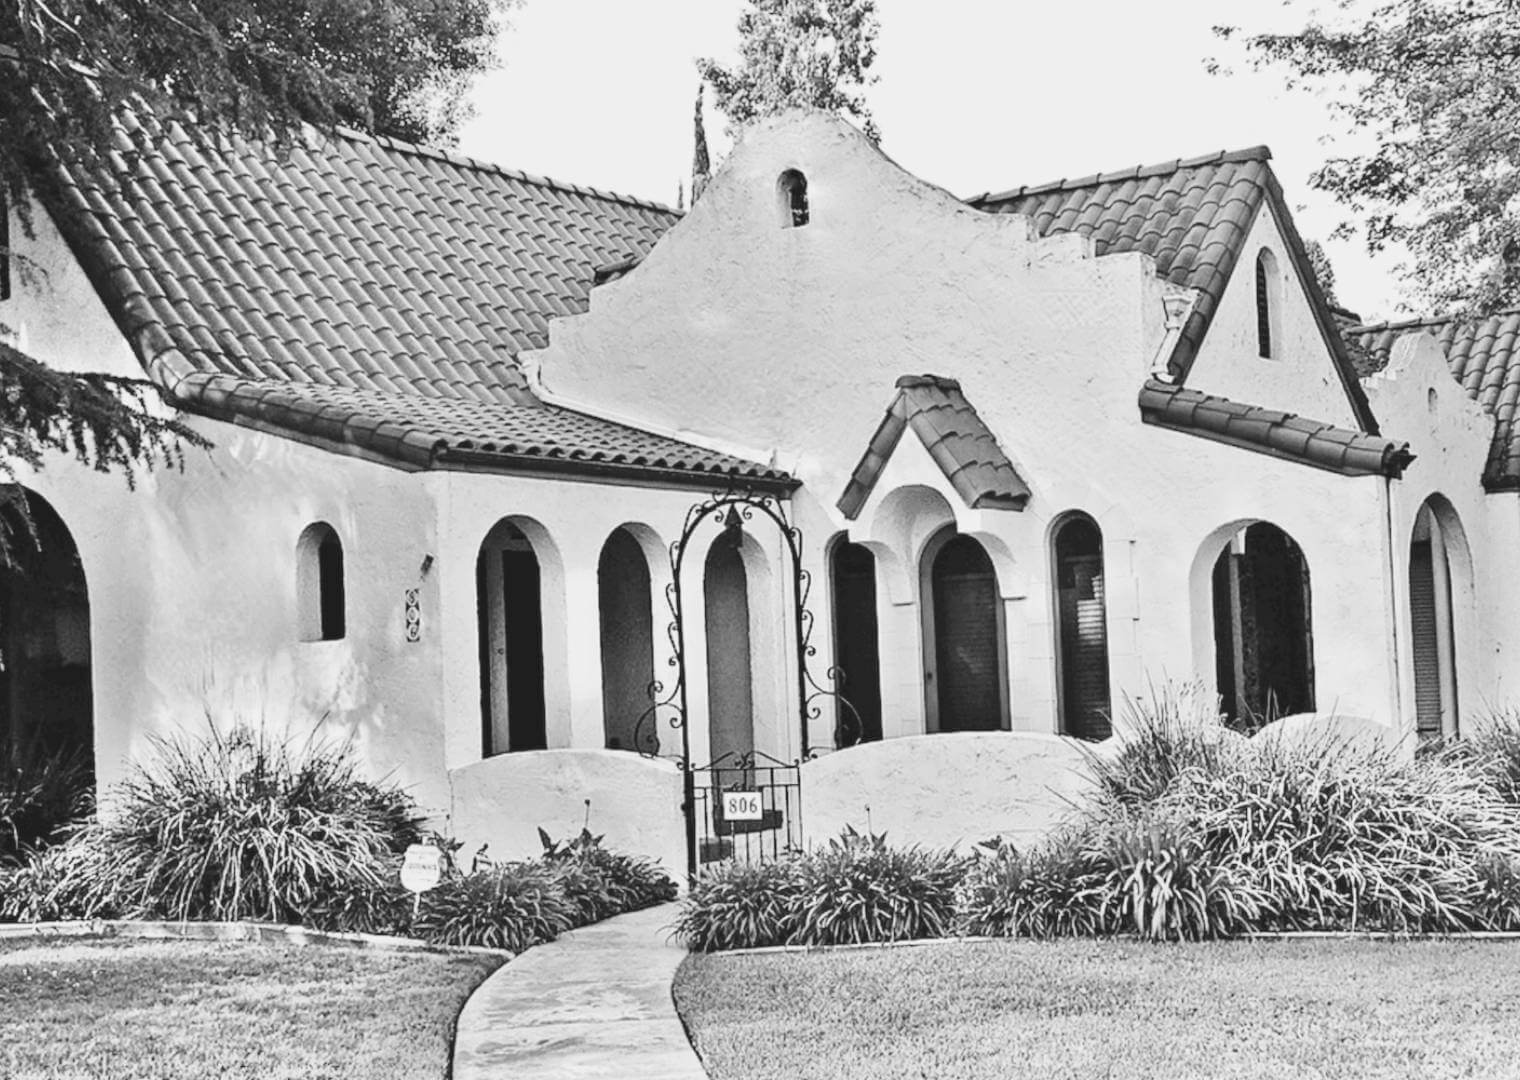 Spanish Colonial Revivals were built in Phoenix in the late 1800s and early 1900s, including gorgeous casita-sized homes, large haciendas and grand villas.